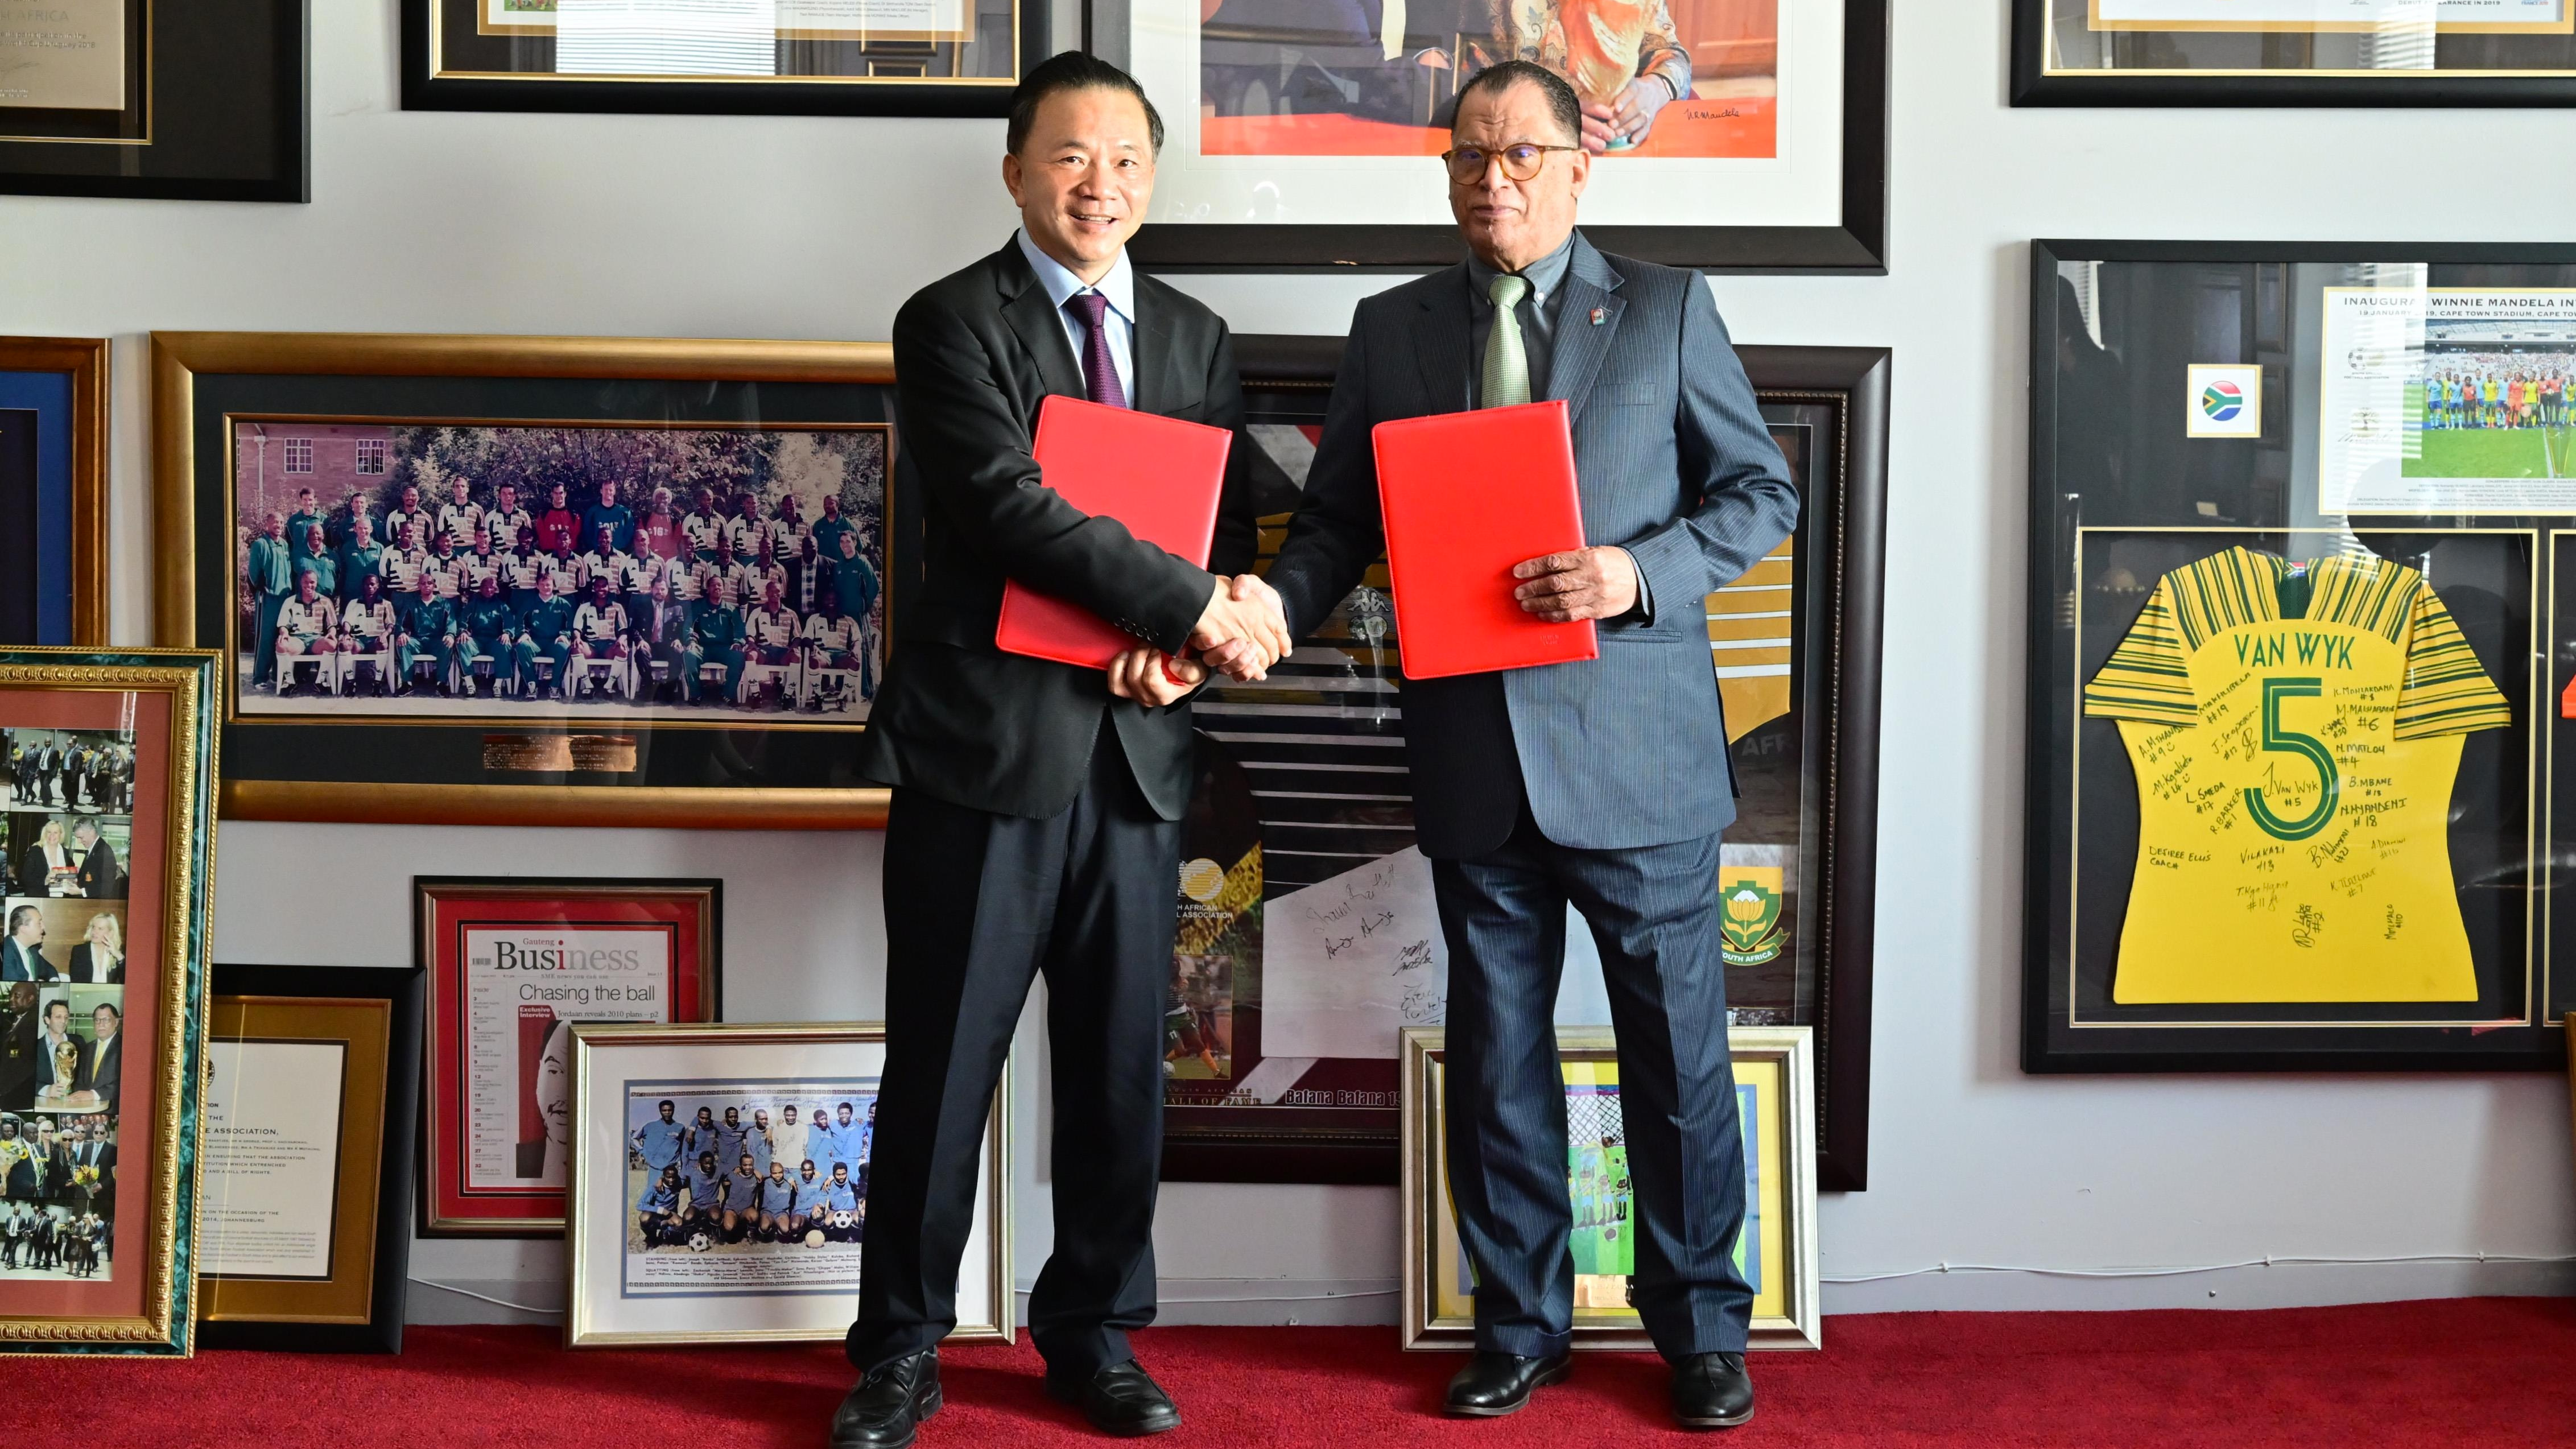 China Media Group (CMG) President Shen Haixiong and President of South African Football Association (SAFA) Danny Jordaan sign a memorandum in Johannesburg, South Africa on August 23, 2023. /CMG